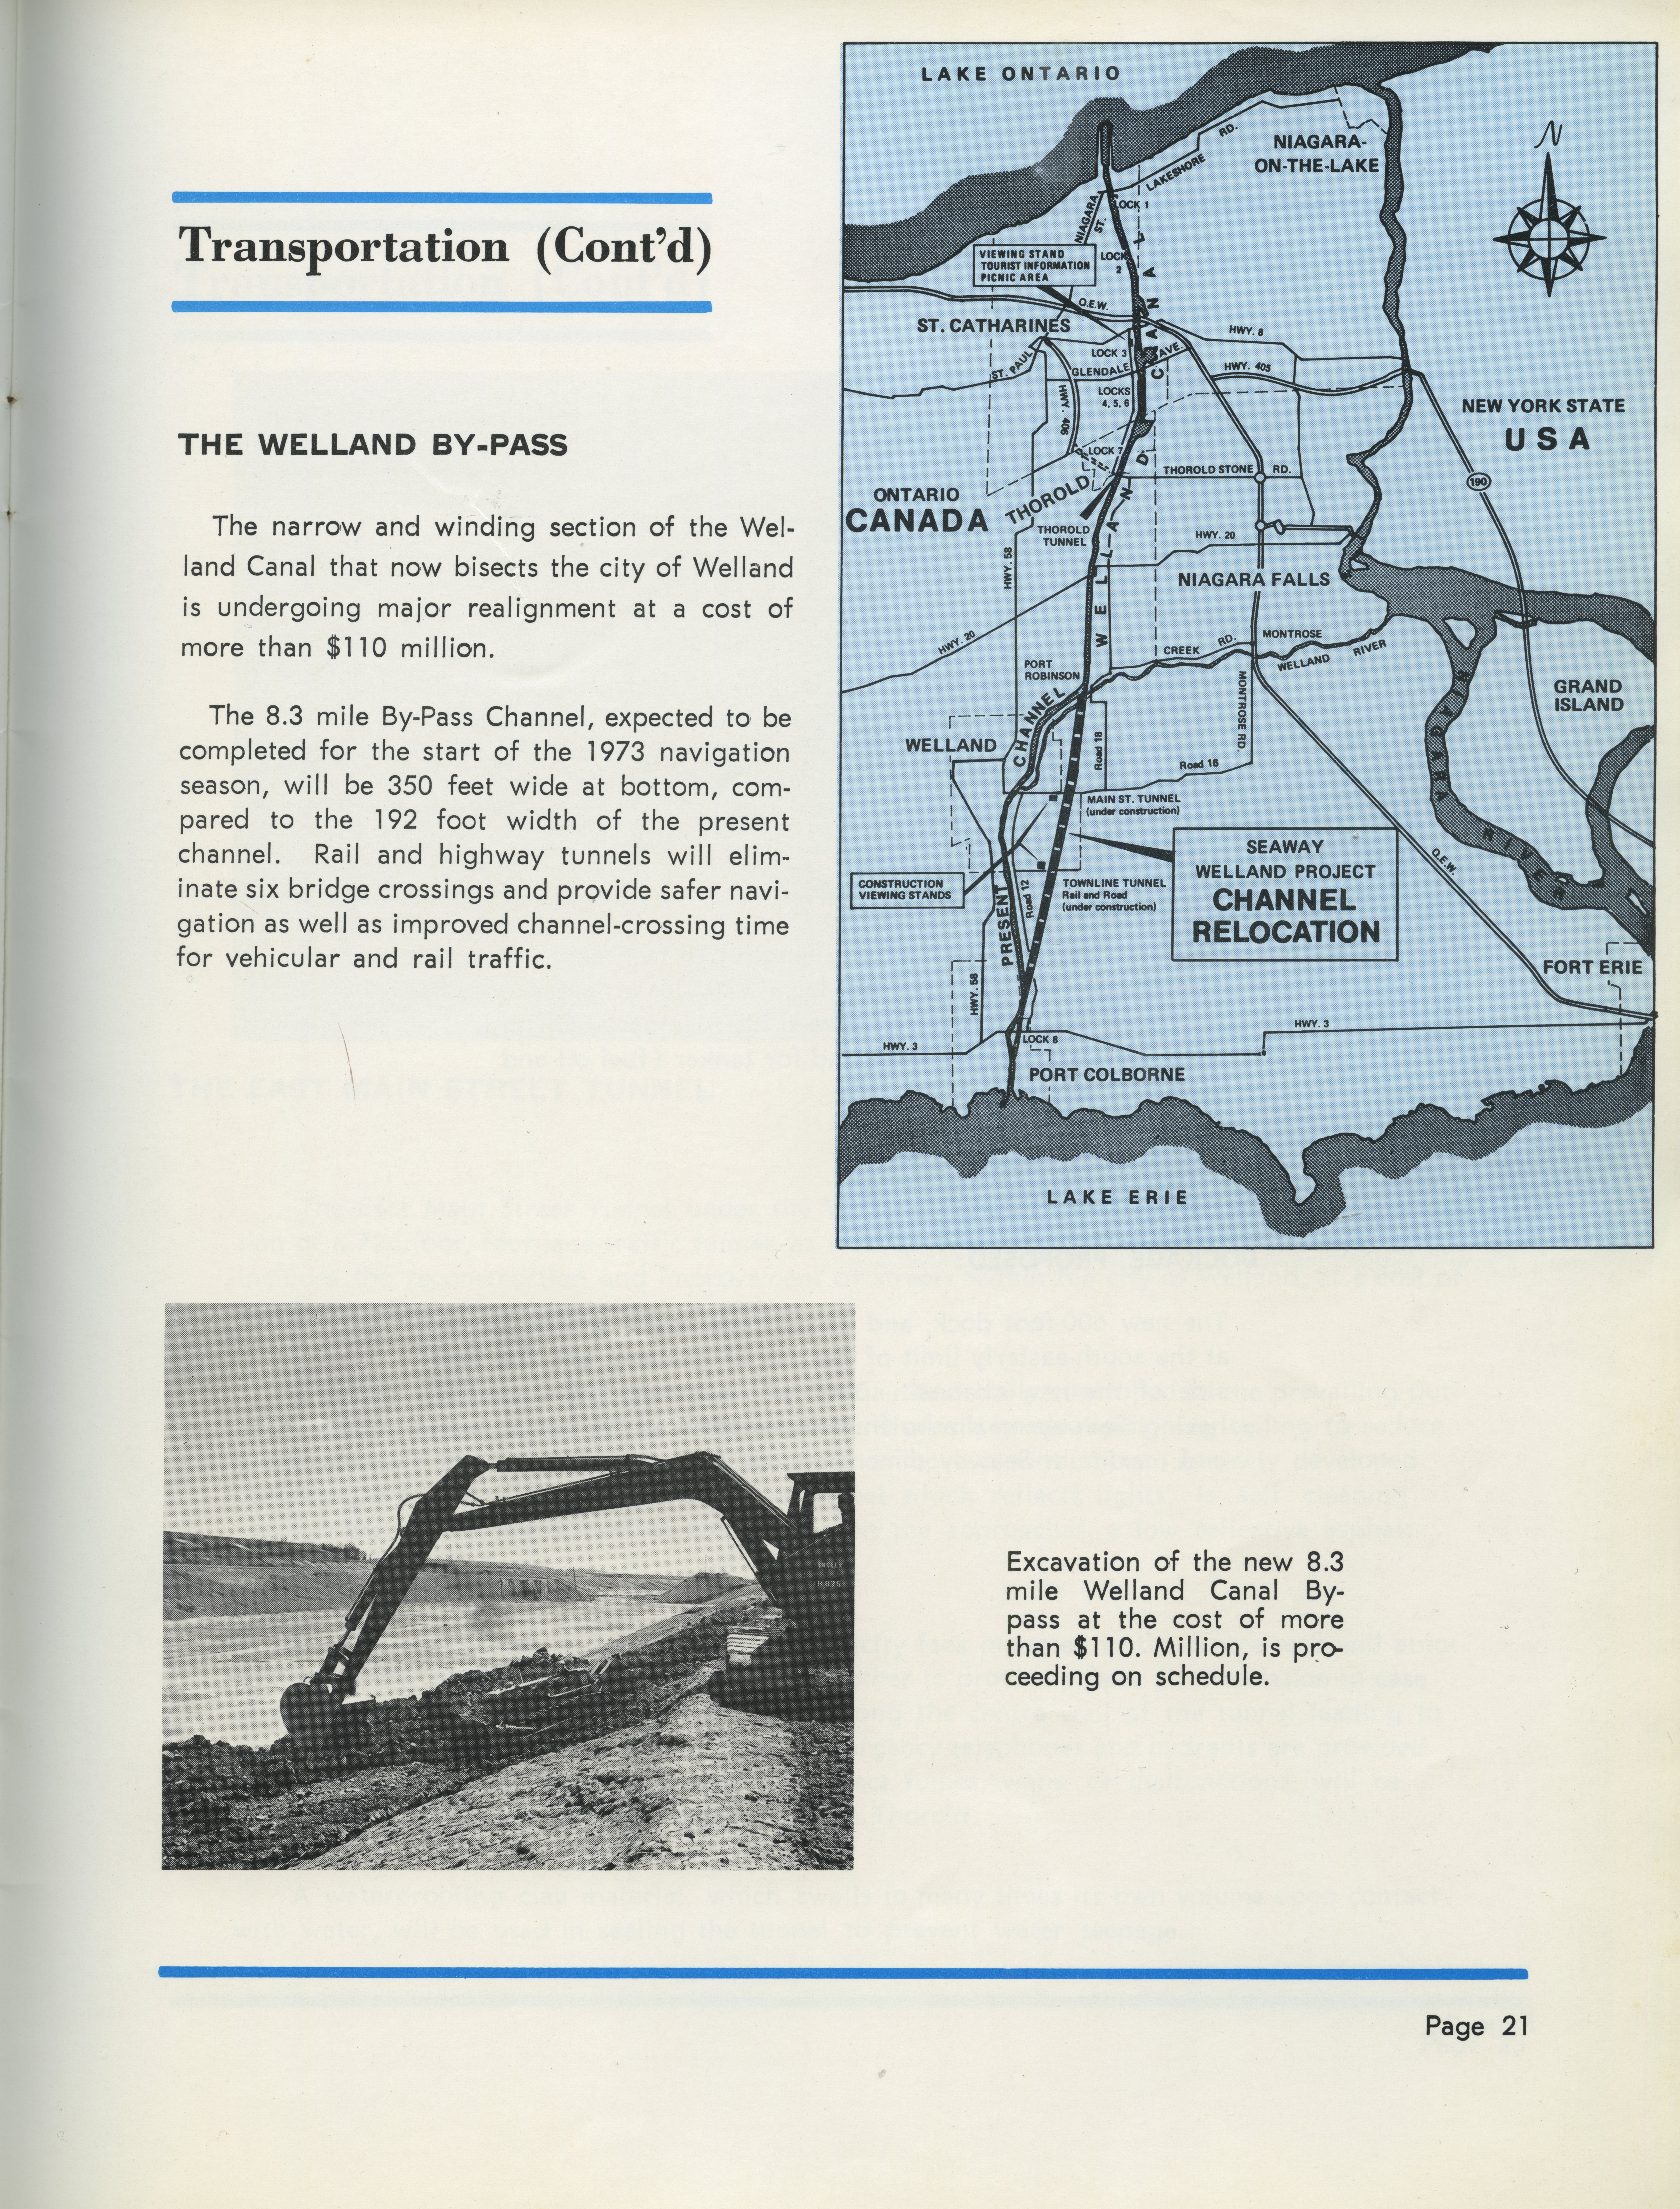 A page about transportation and the Welland bypass. There is a small map and a picture of a vehicle used for construction.